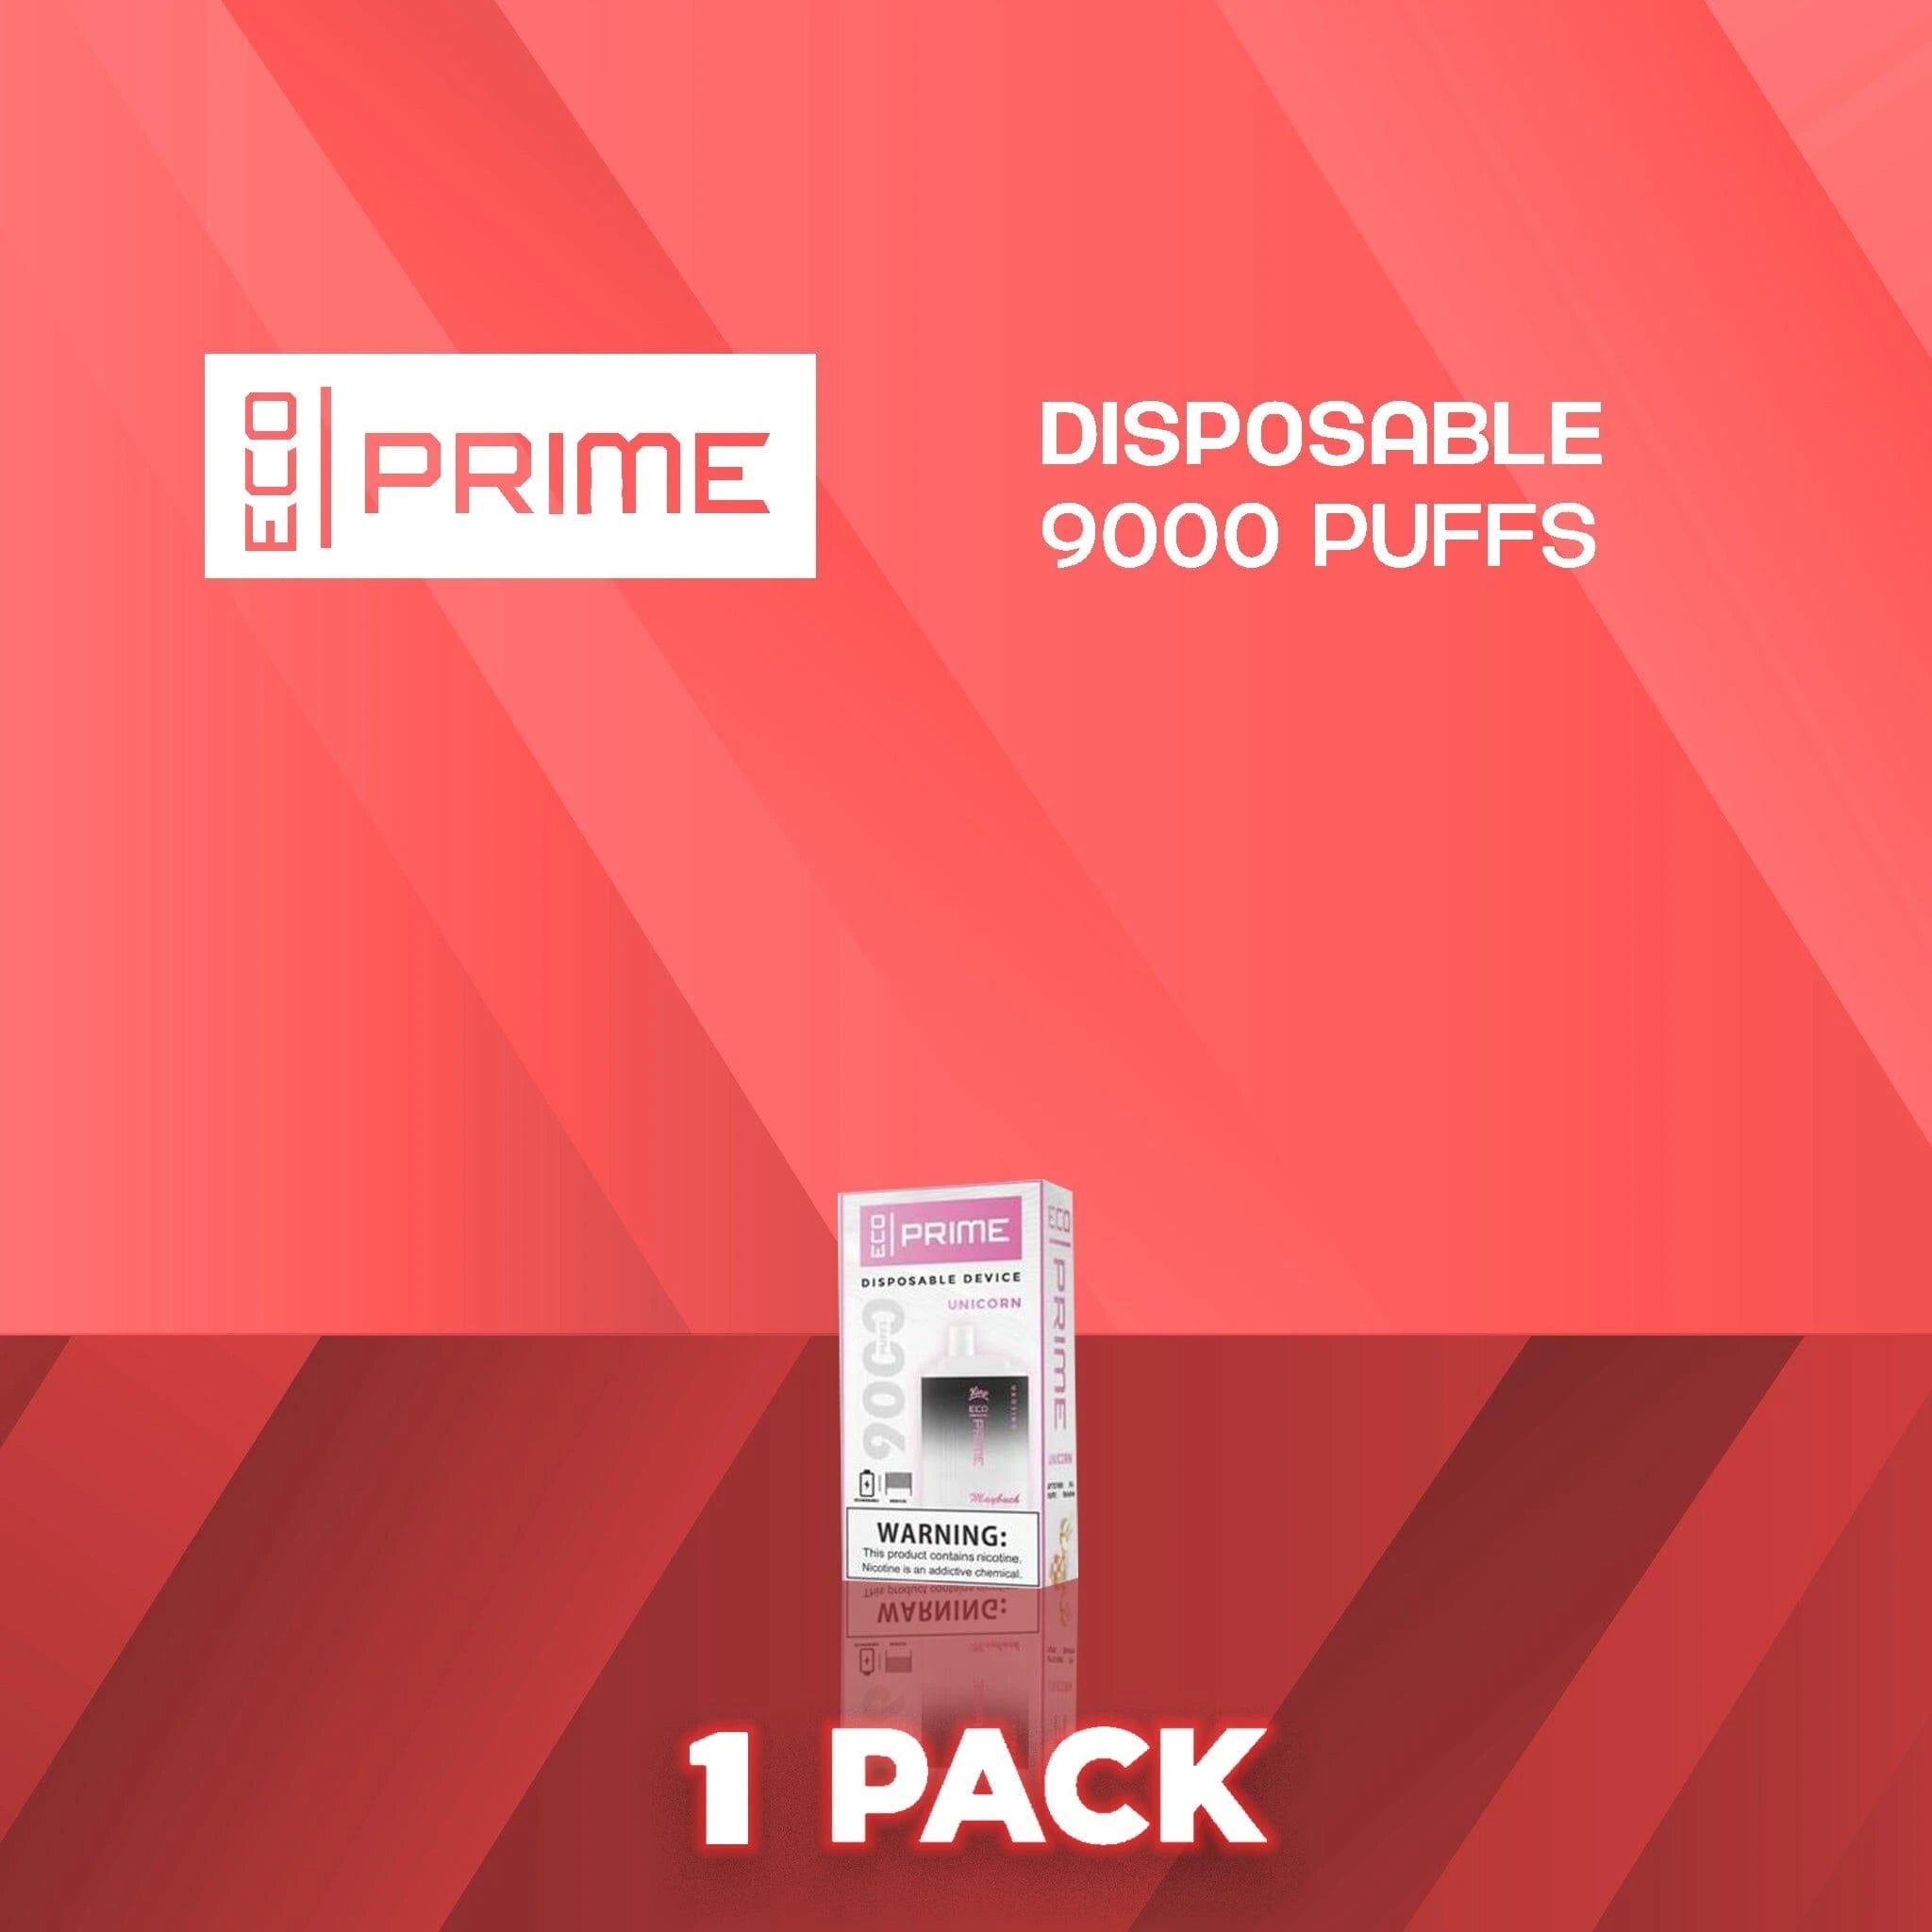 Eco Prime 9000 Puffs Disposable Vape - 1 Pack